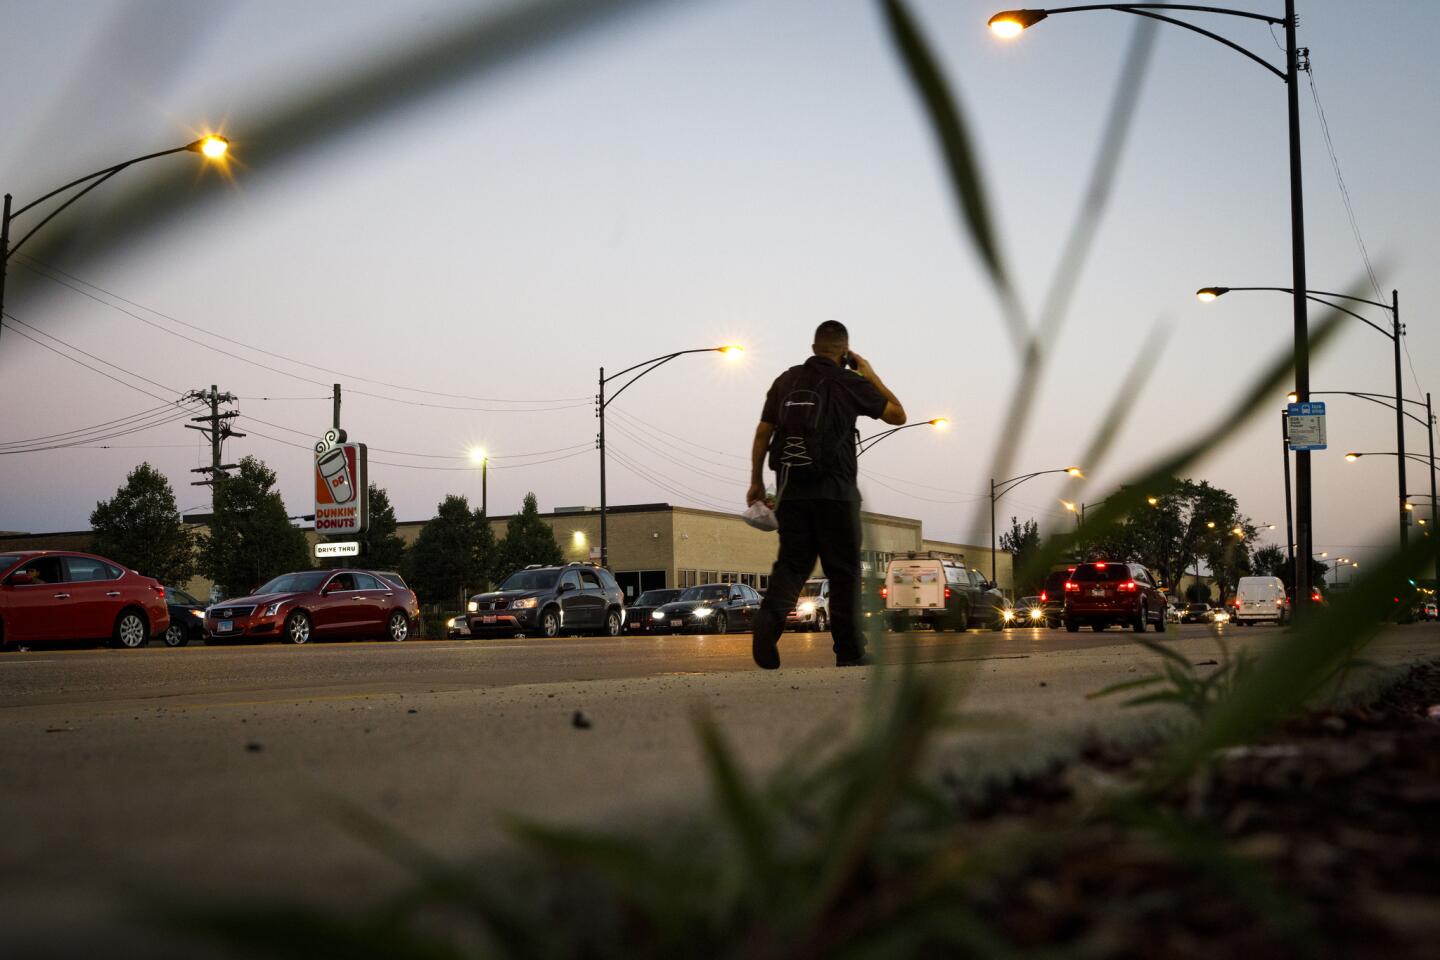 A person walks on the sidewalk in the 4100 block of South Pulaski Road on Sept. 13, 2018, near the location where Laquan McDonald was shot by Chicago police officer Jason Van Dyke in 2014.